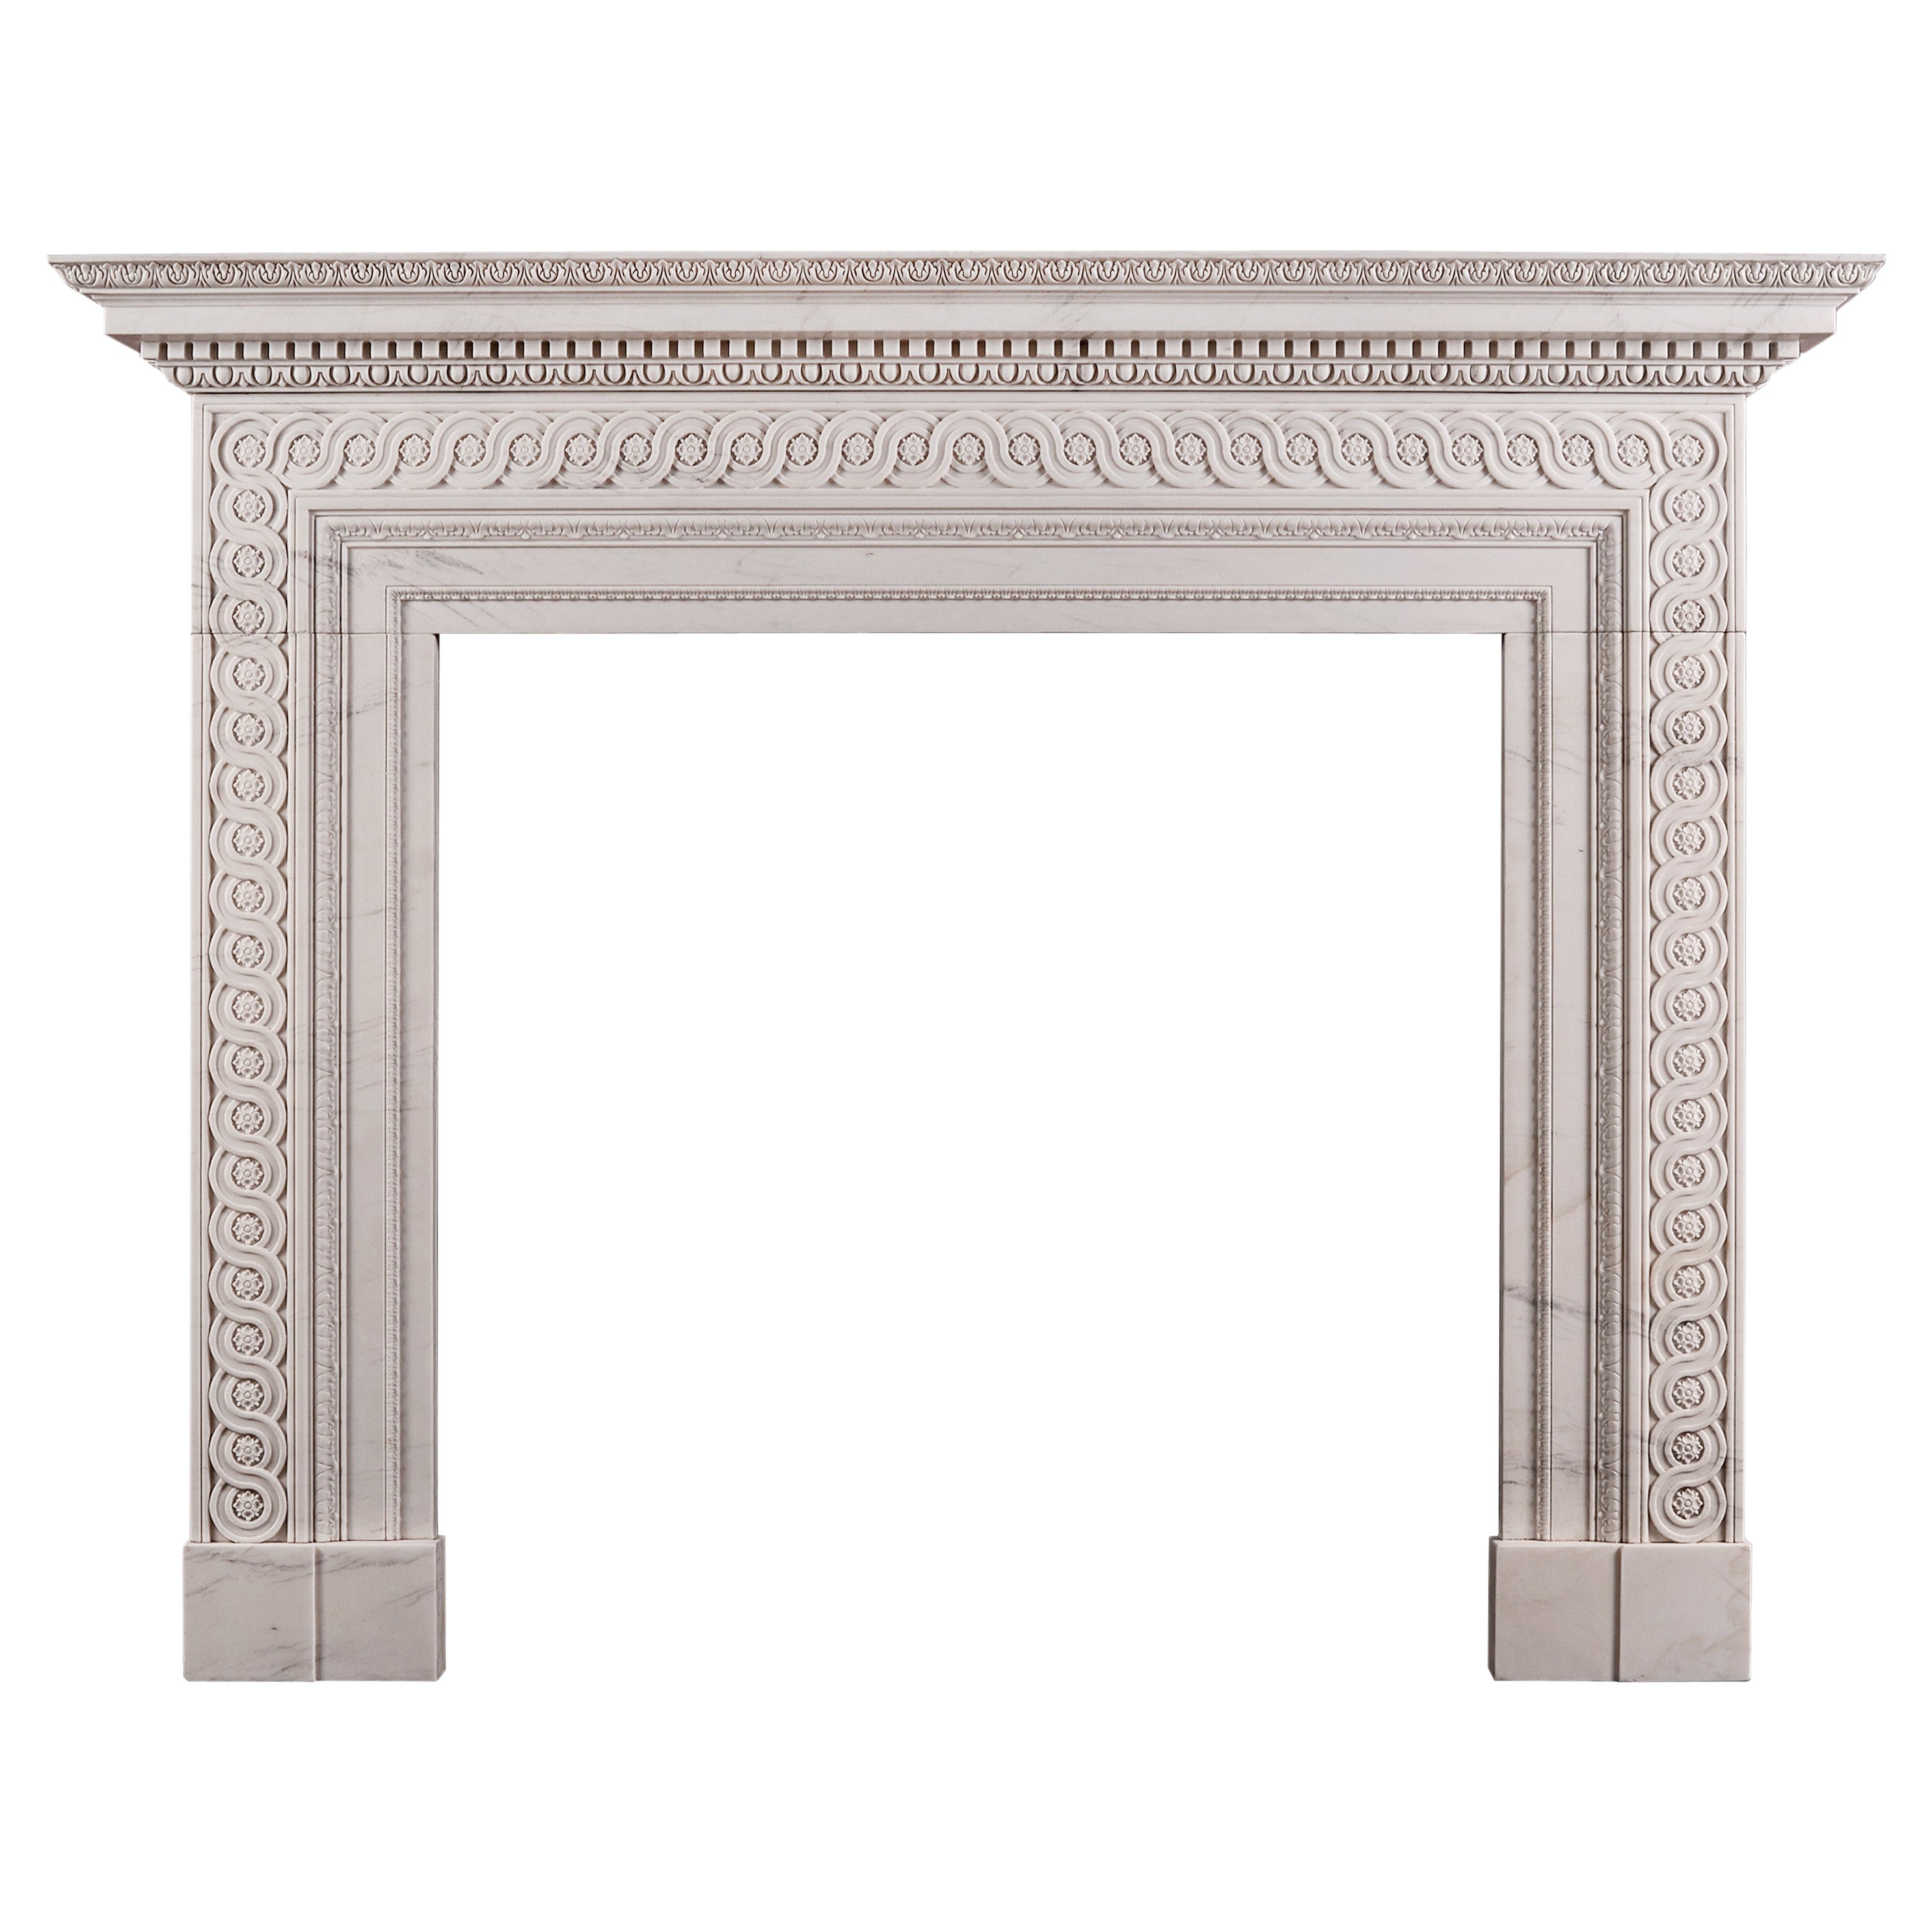 Late Georgian Style Fireplace Carved in White Marble For Sale